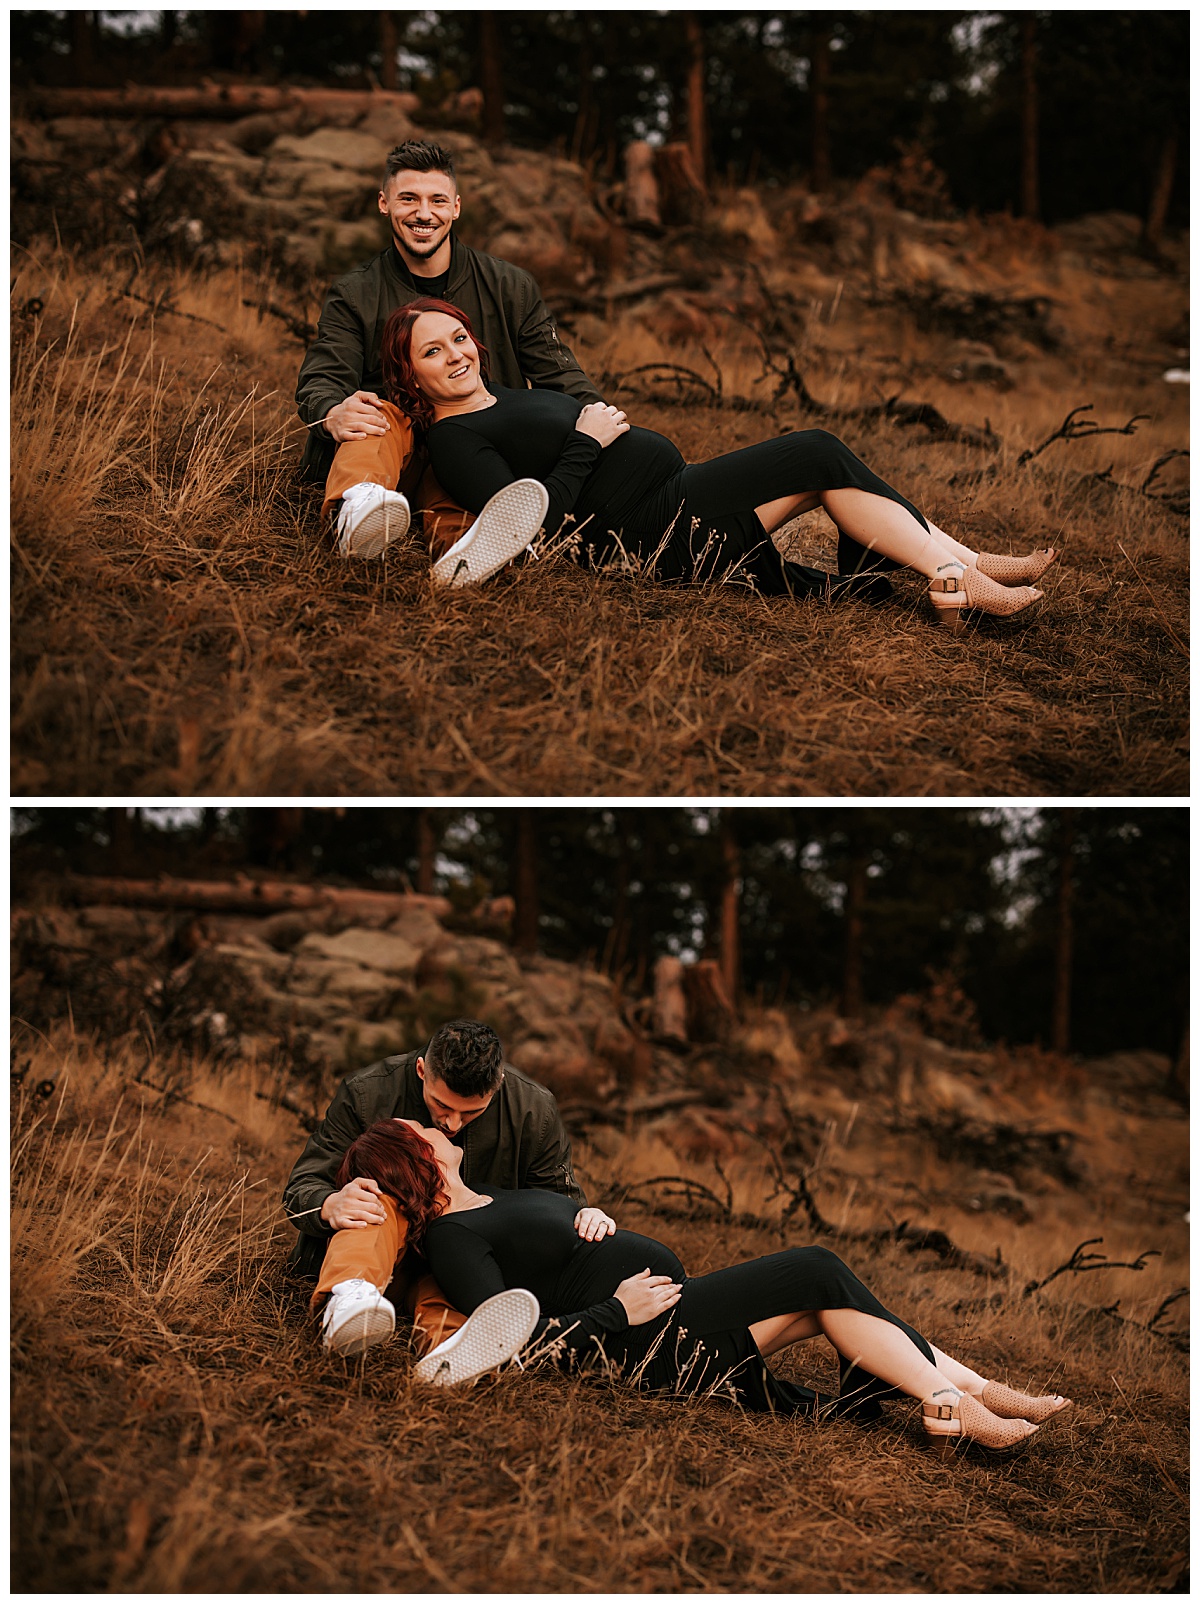 woman lays across man's lap during outdoor maternity couples session